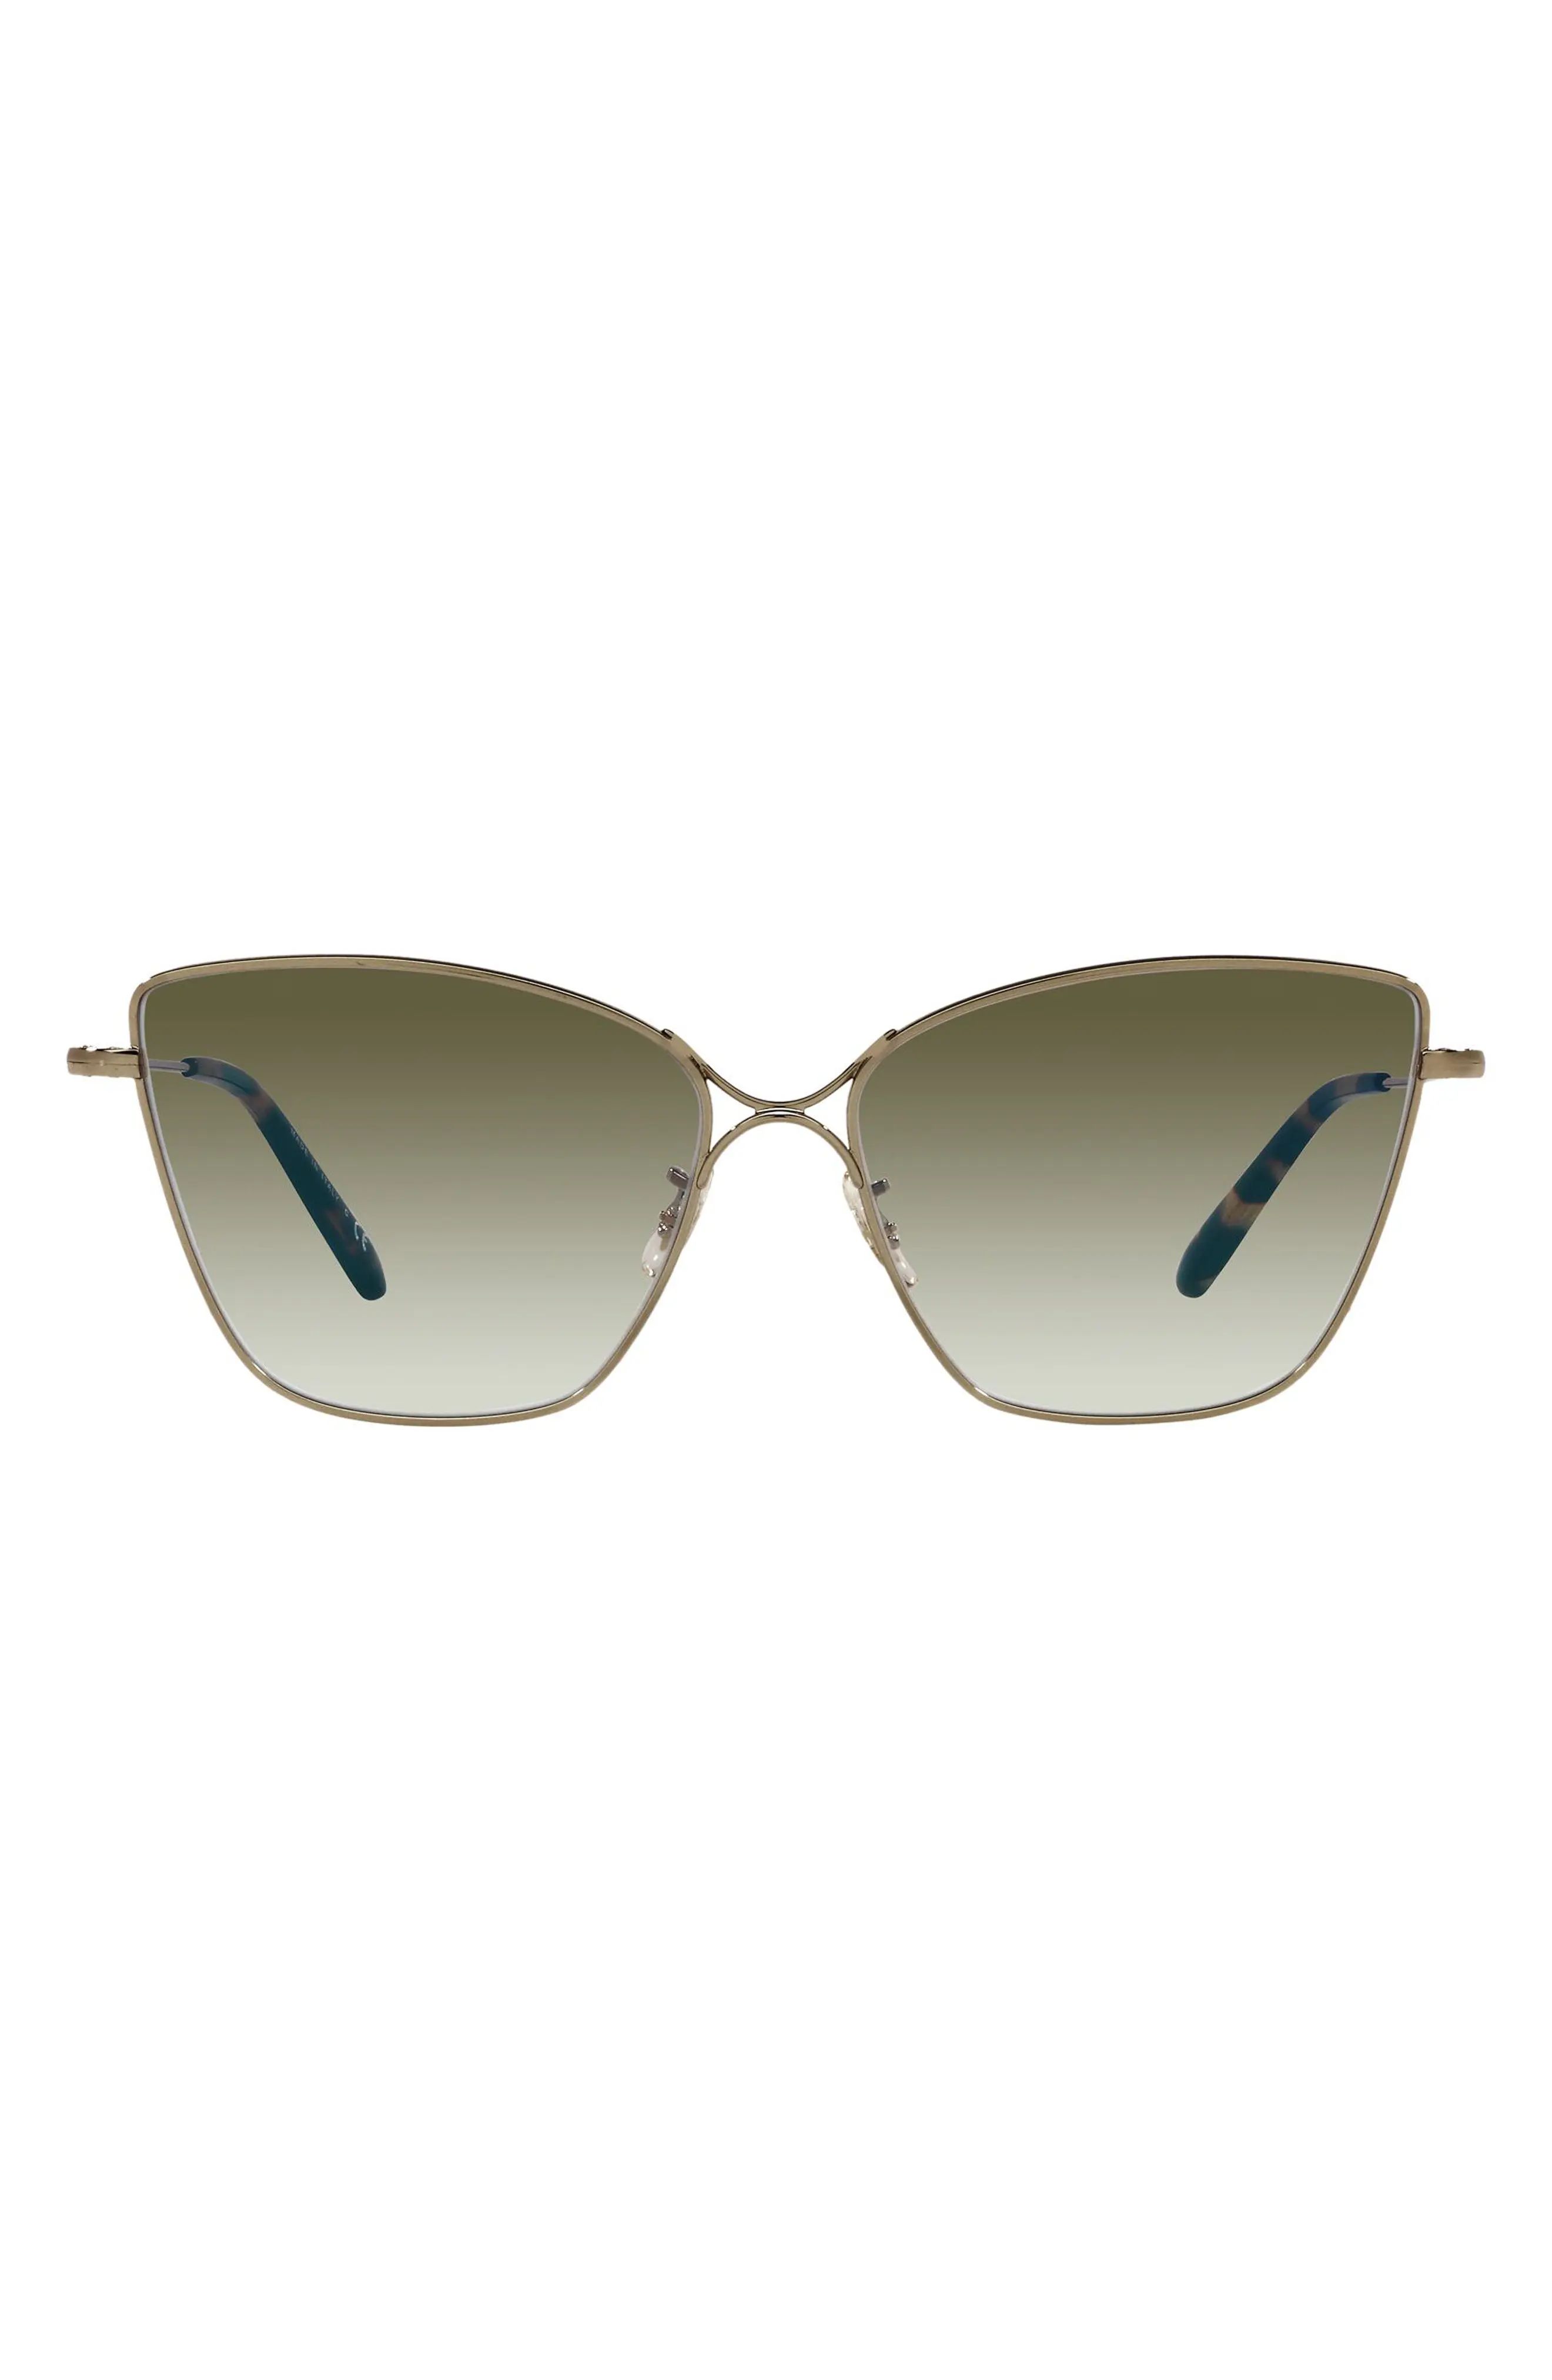 Oliver Peoples Marlyse 60mm Butterfly Sunglasses in Brushed Gold/Olive Gradient at Nordstrom | Nordstrom